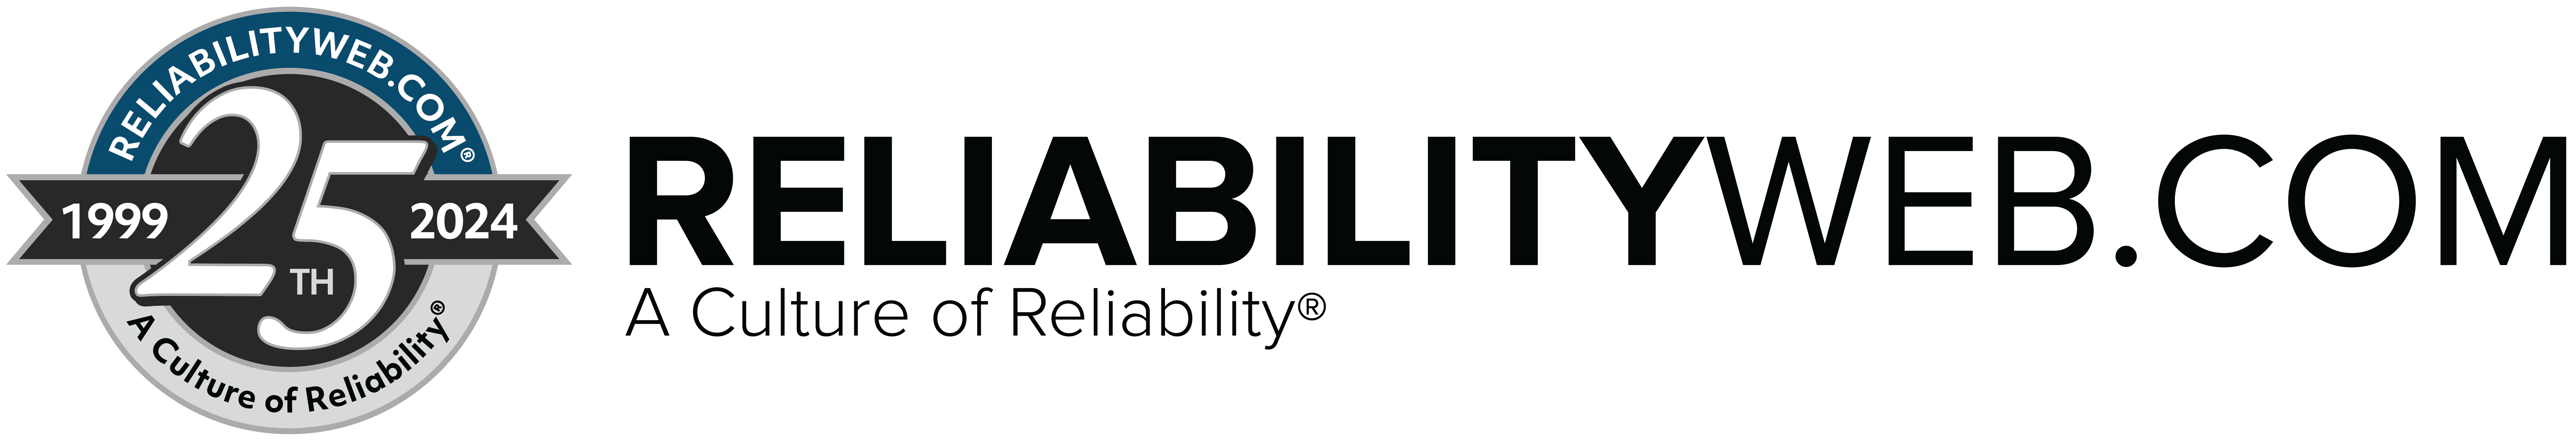 Reliabilityweb How to get reliability into the design process.